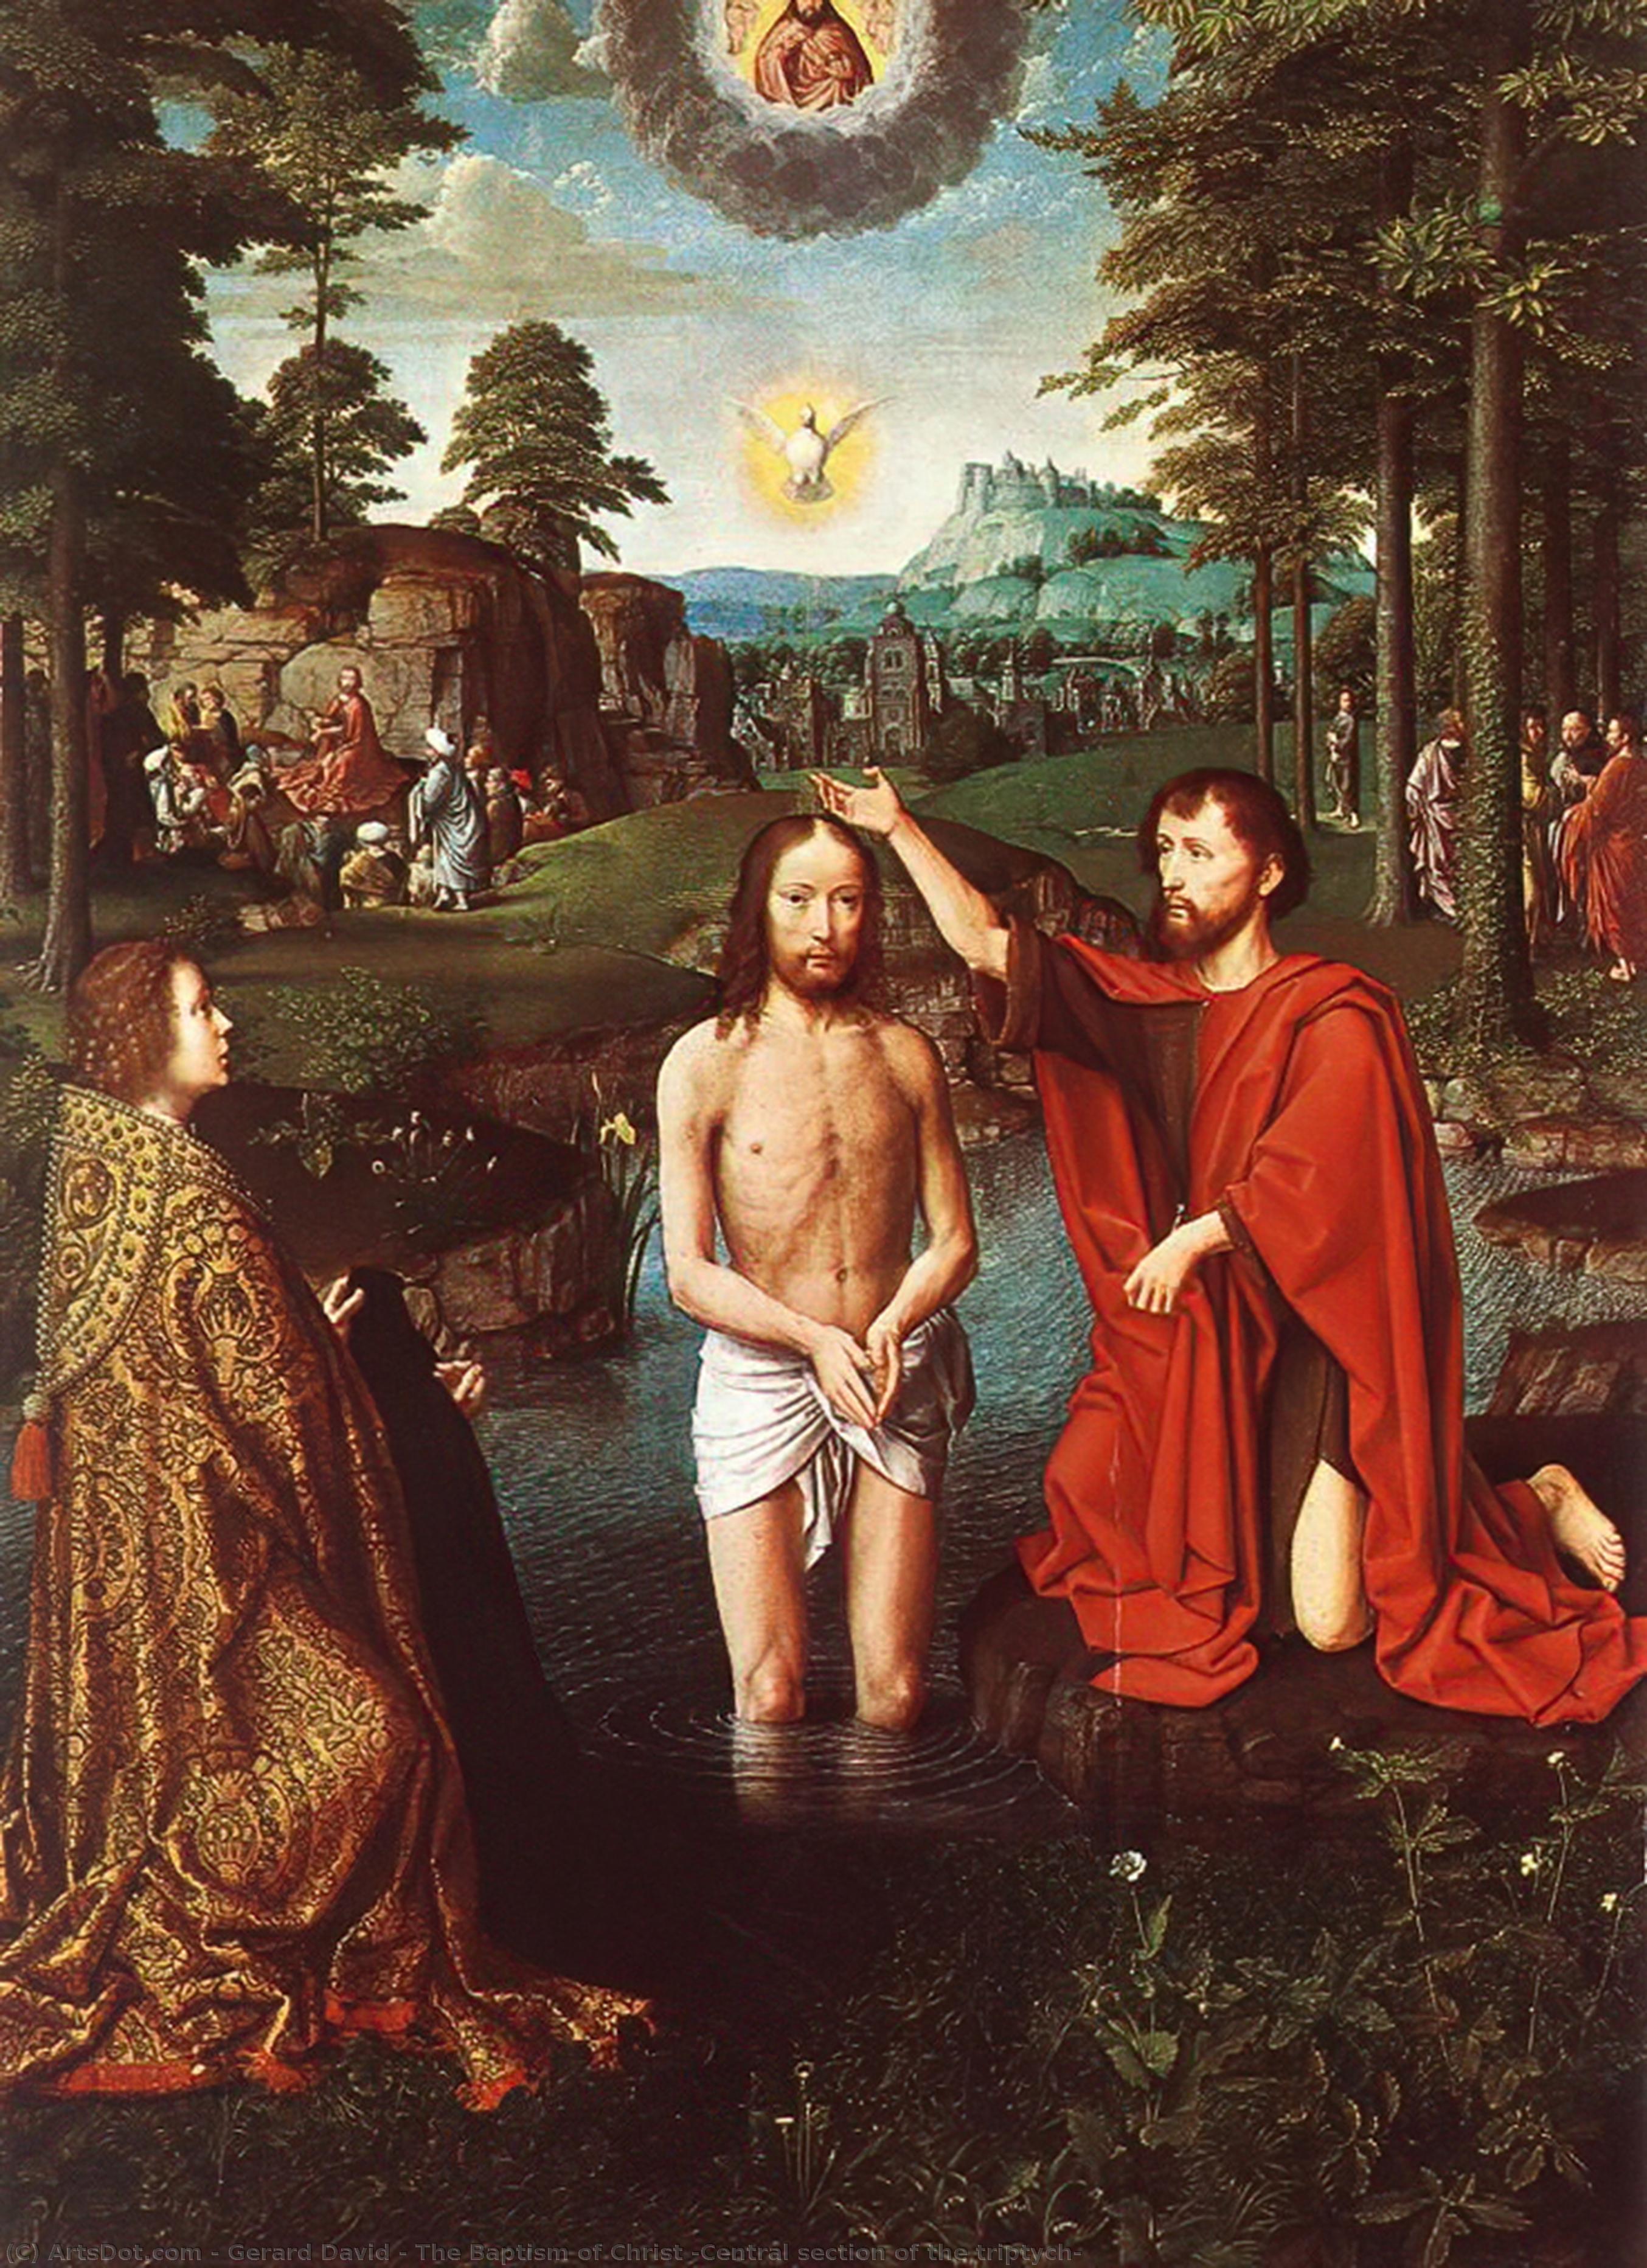 WikiOO.org - 백과 사전 - 회화, 삽화 Gerard David - The Baptism of Christ (Central section of the triptych)